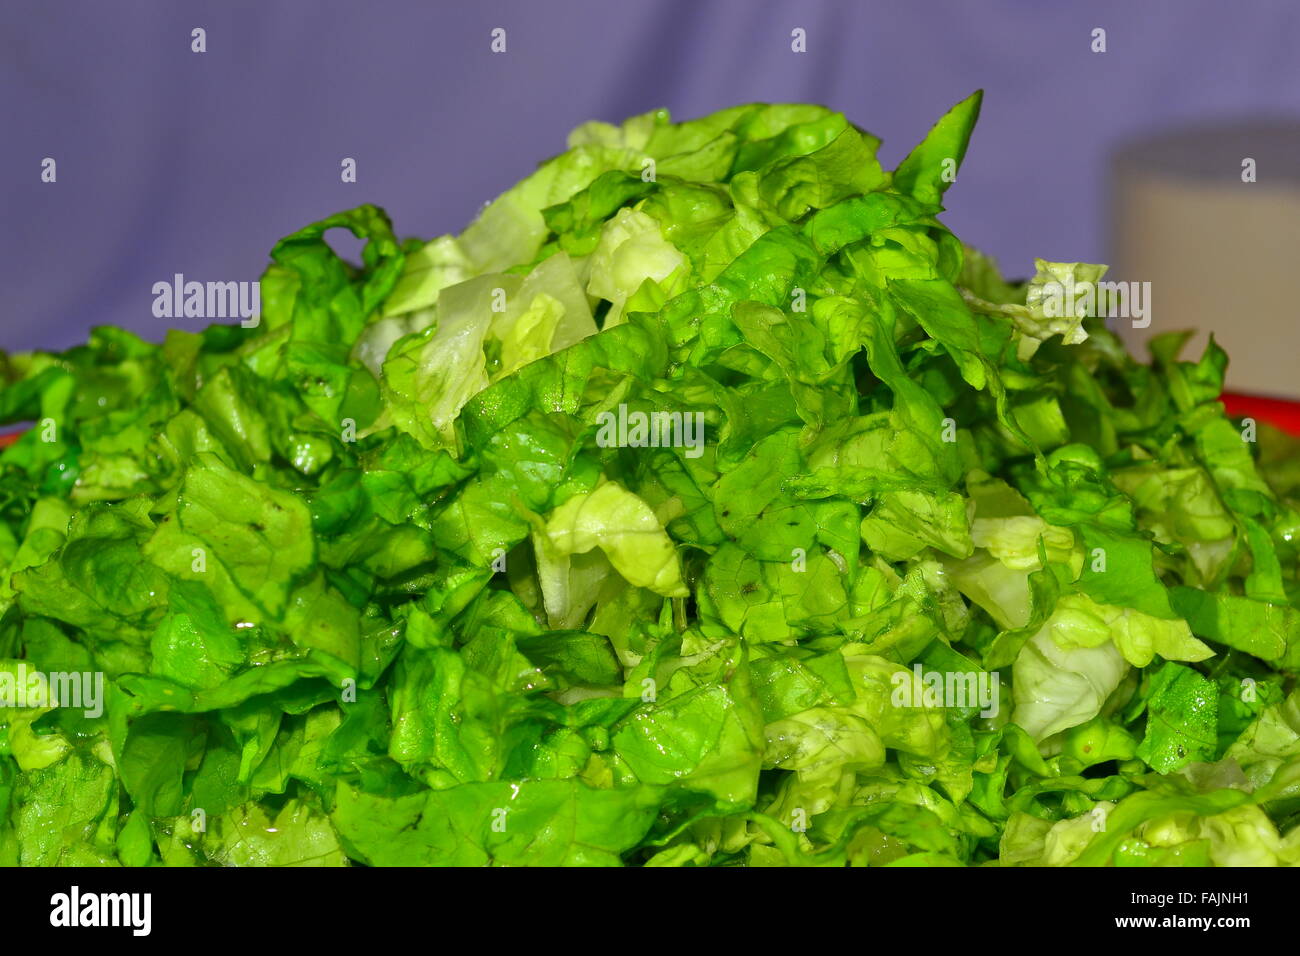 Shred lettuce presented on a tray Stock Photo